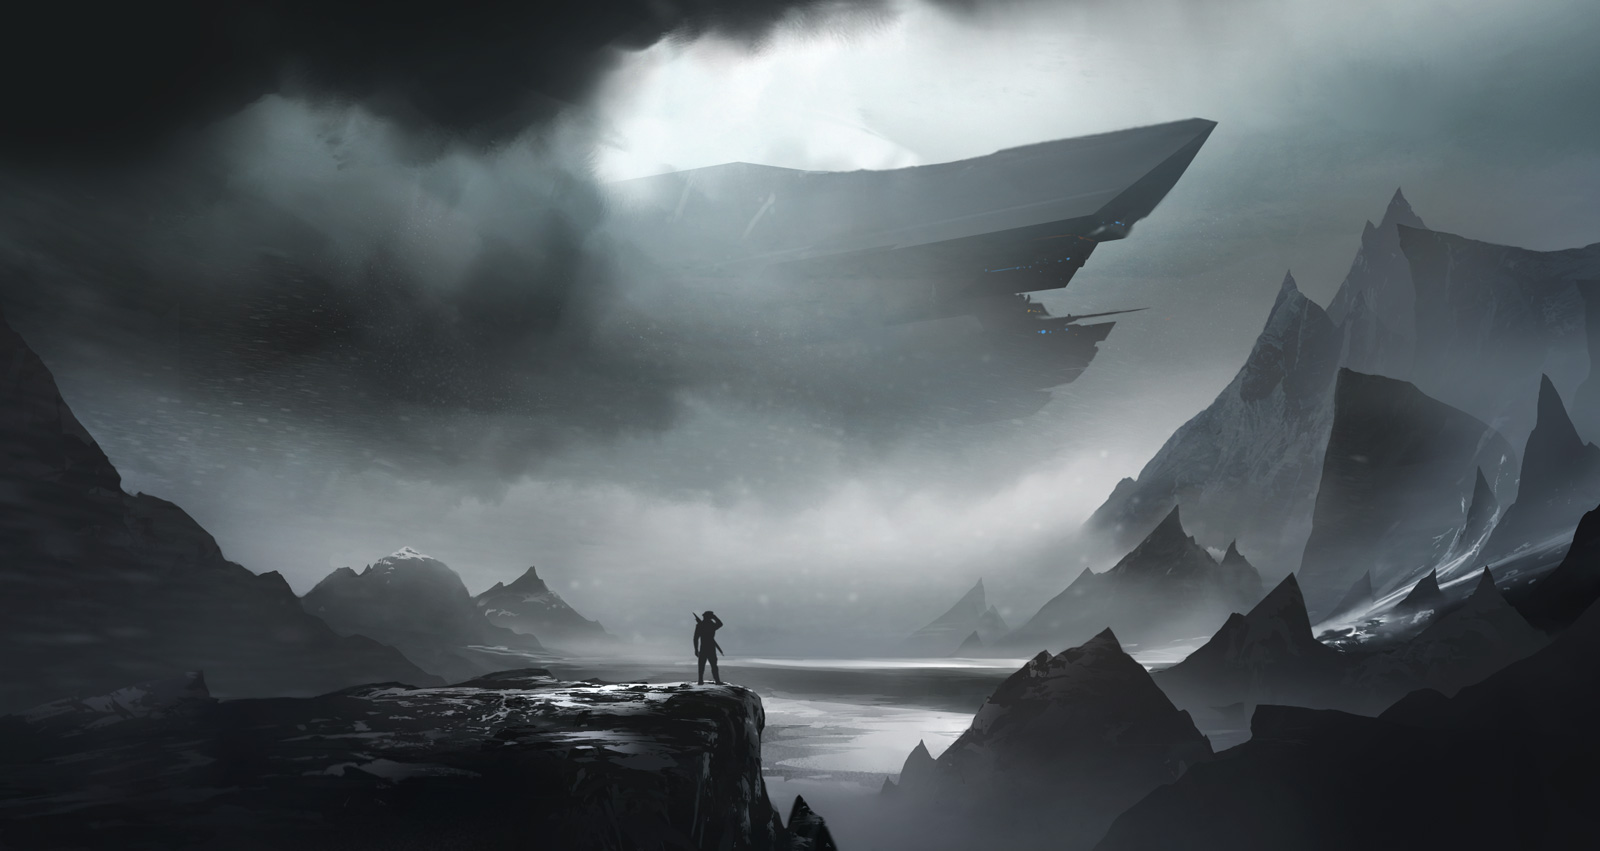 The prow of the carrier broke through the clouds, and he paused on the cliff, wondering if he could make it across the expanse of ice before he was spotted. Space opera in the arctiiiiic!